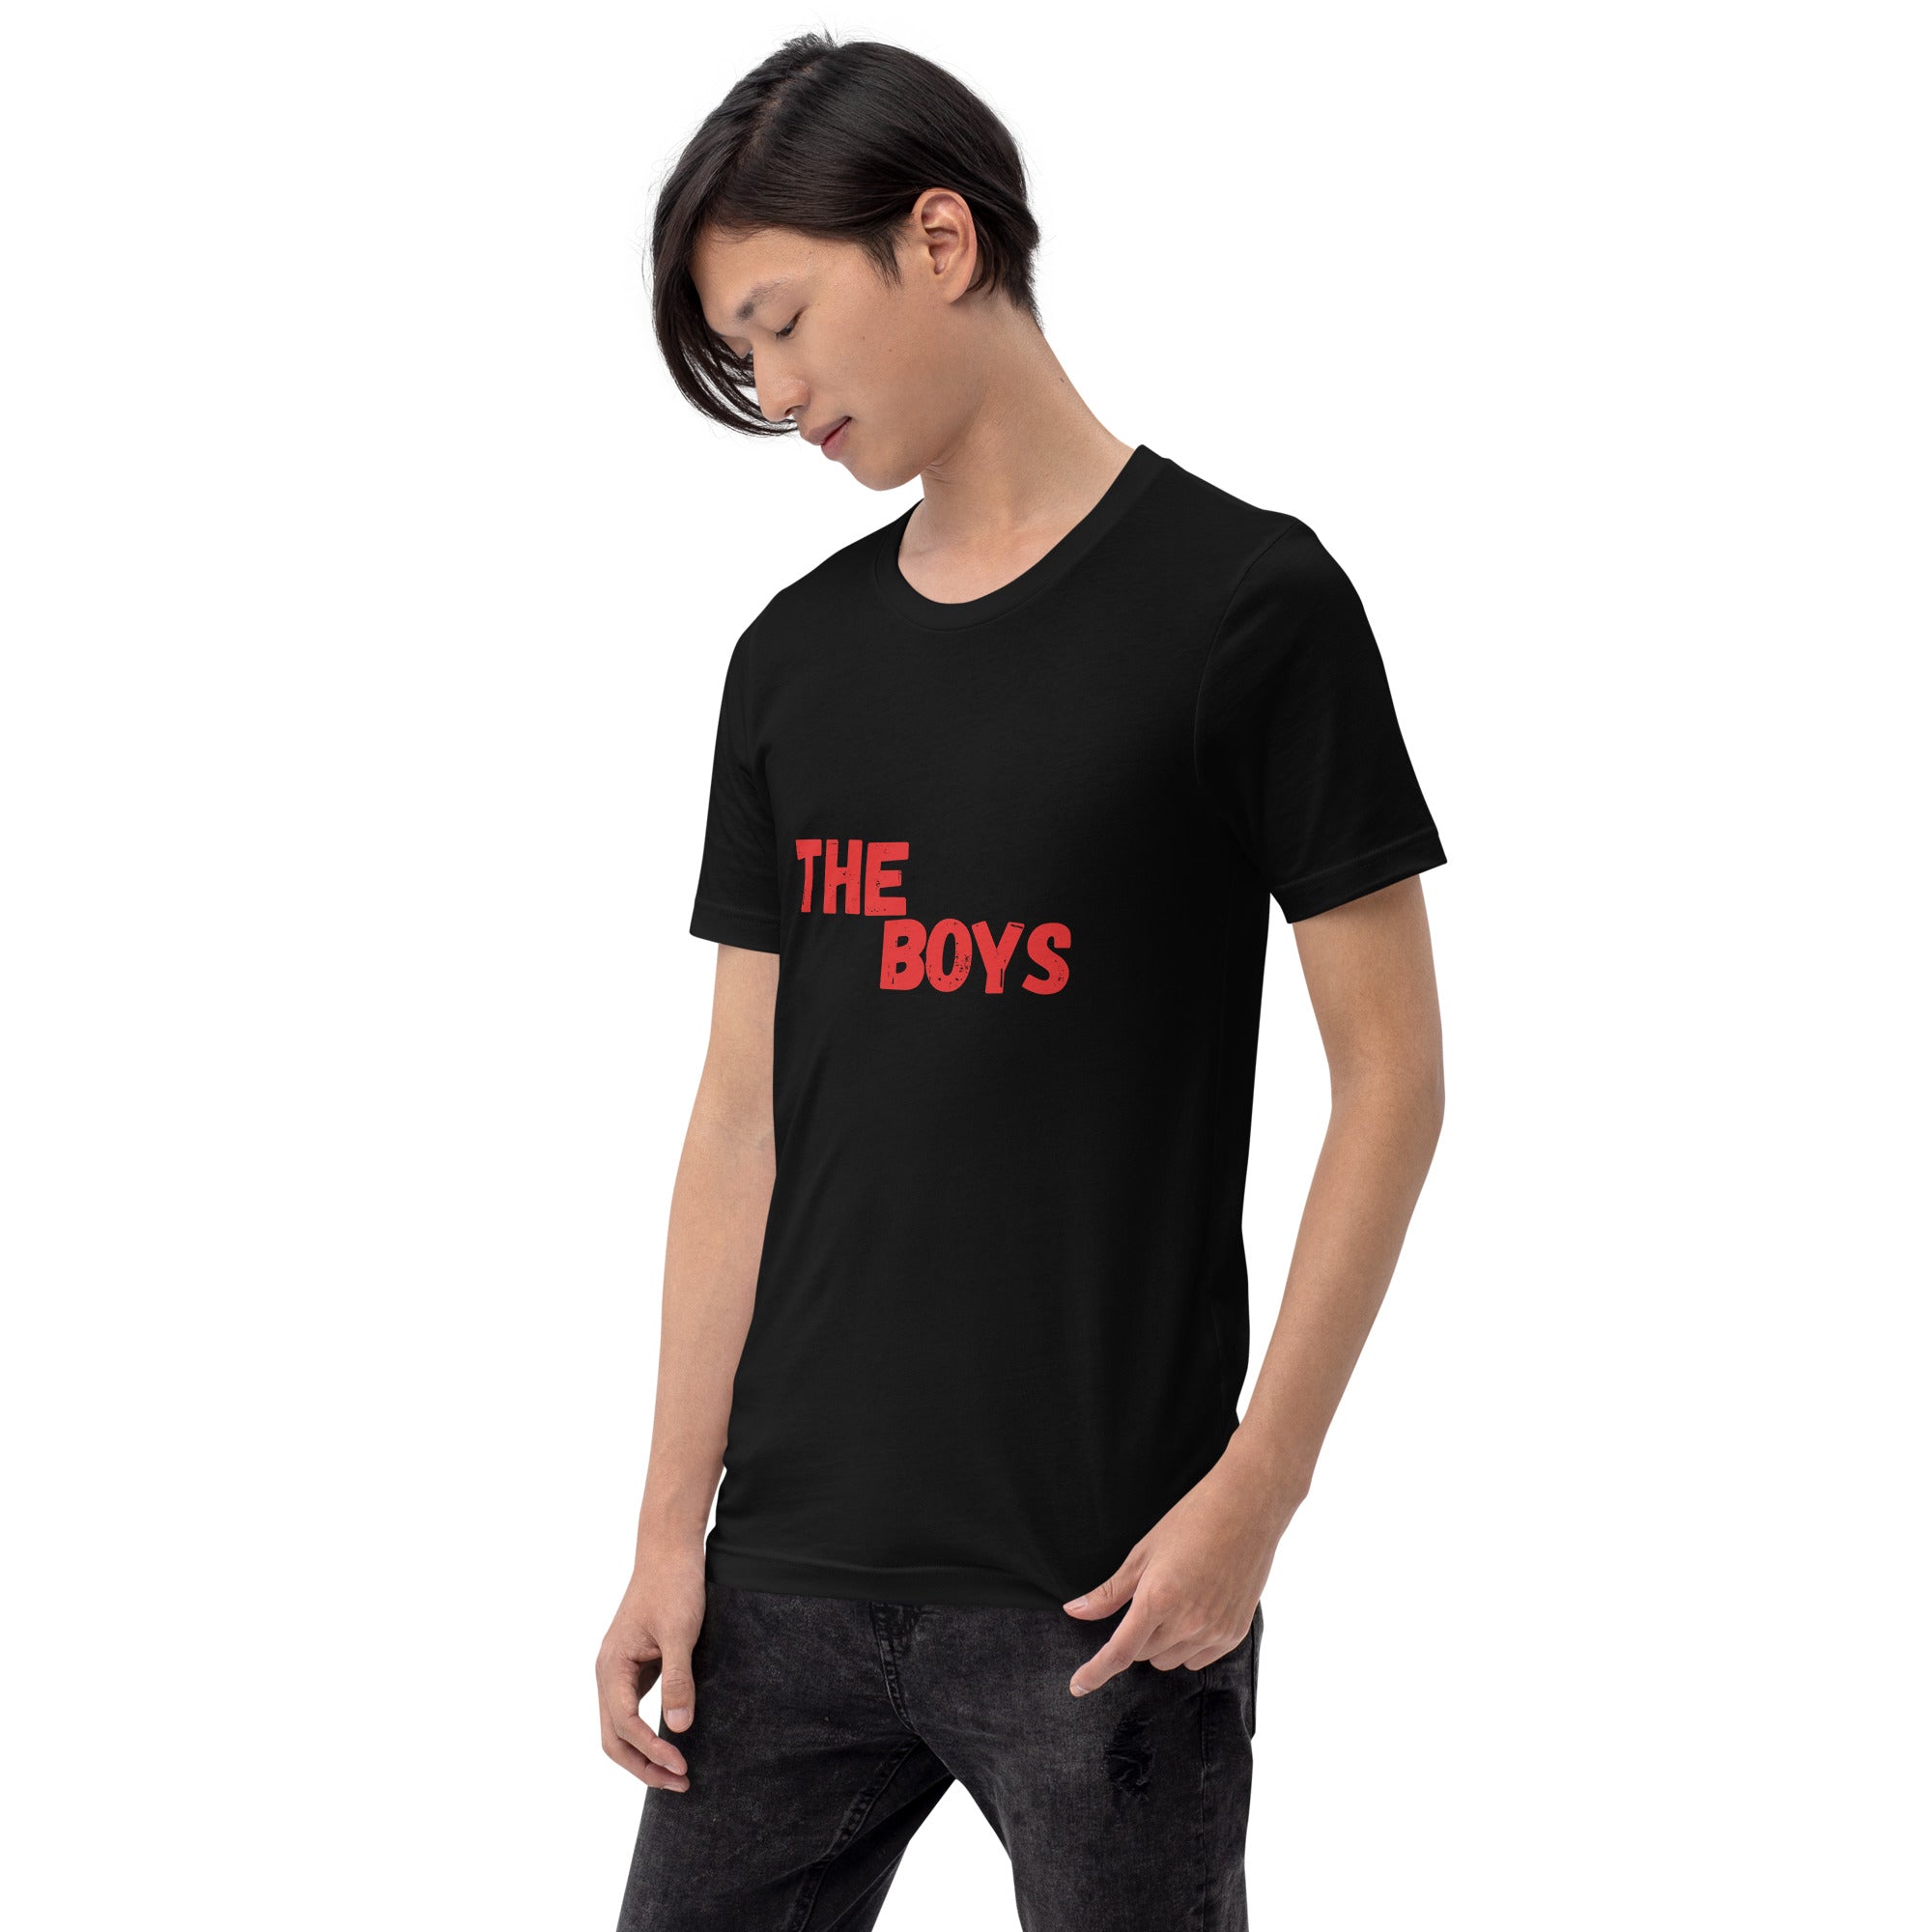 Amazon Original The Boys t shirt for men pure cotton in black and white